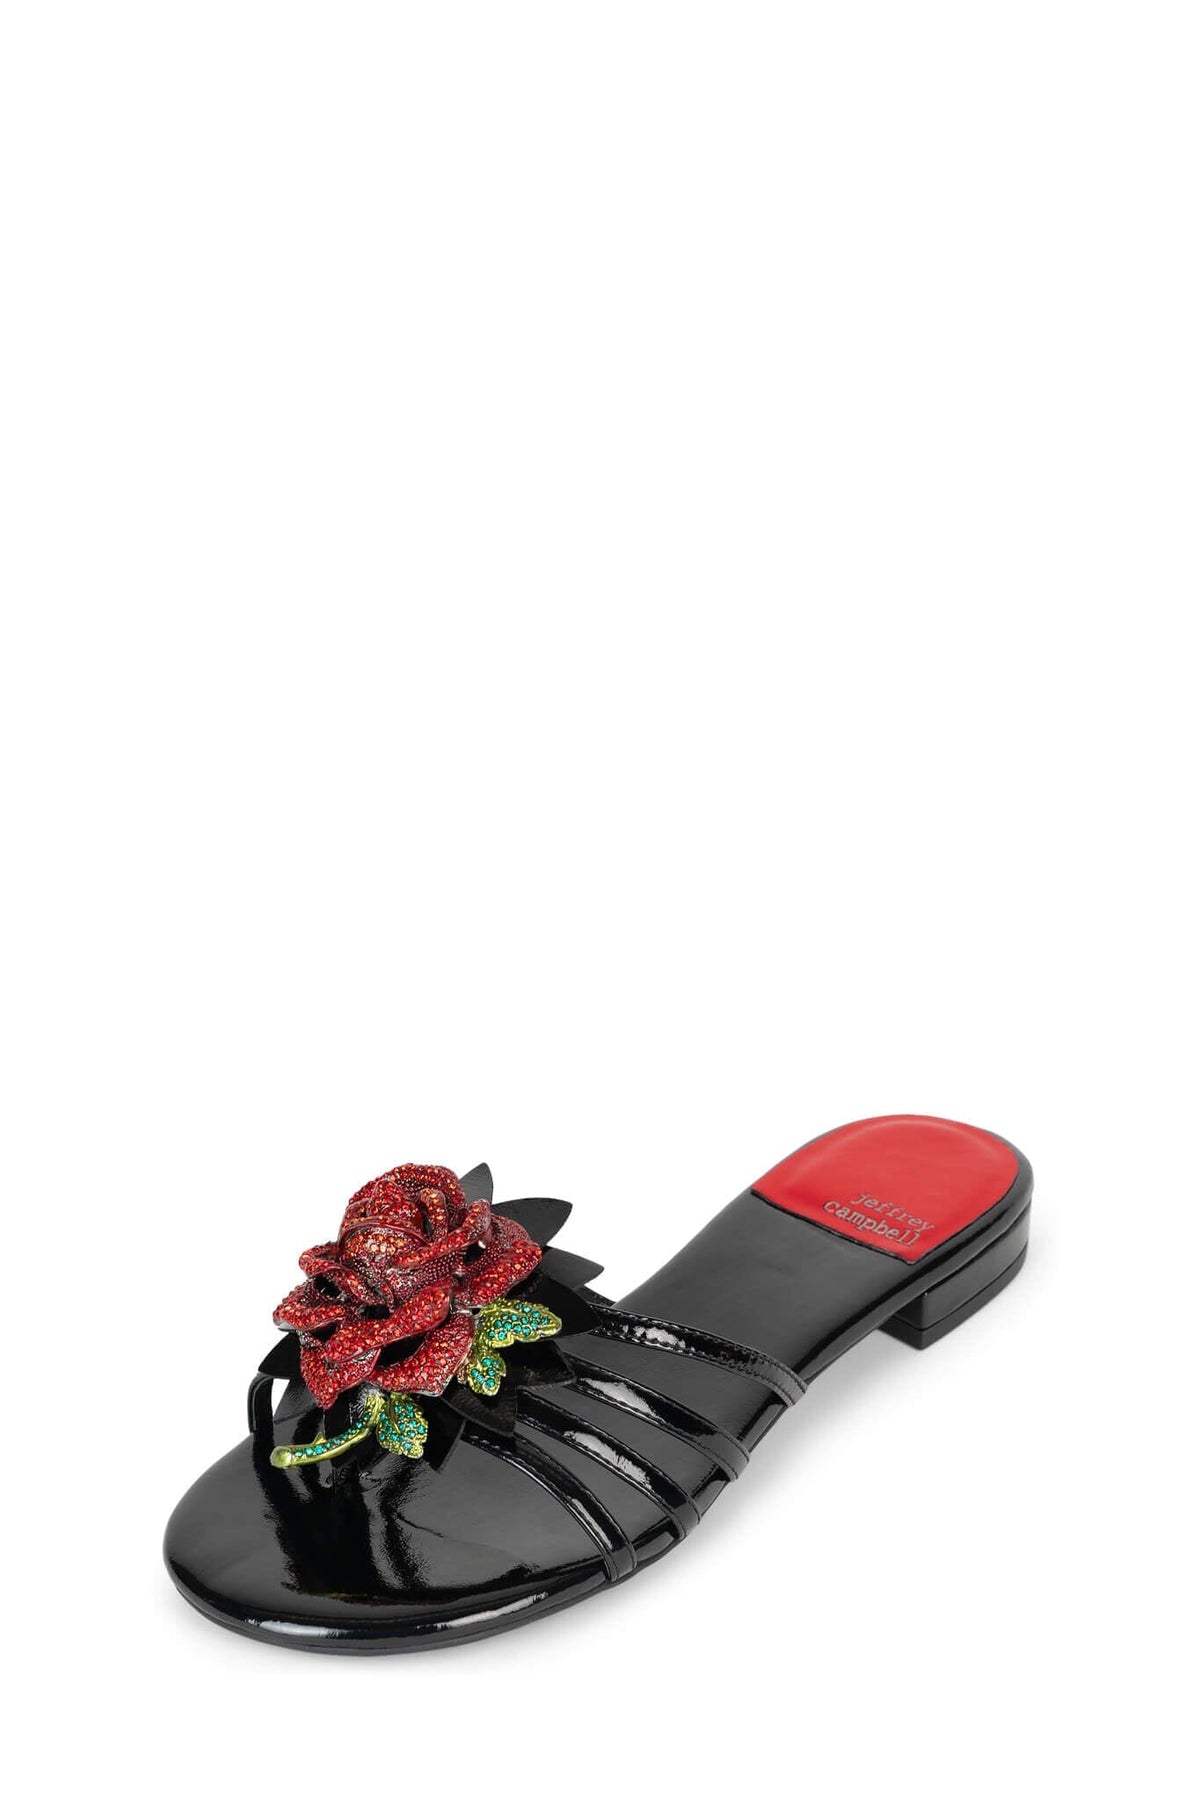 ENCHANTED Jeffrey Campbell Flat Sandals Black Patent Red